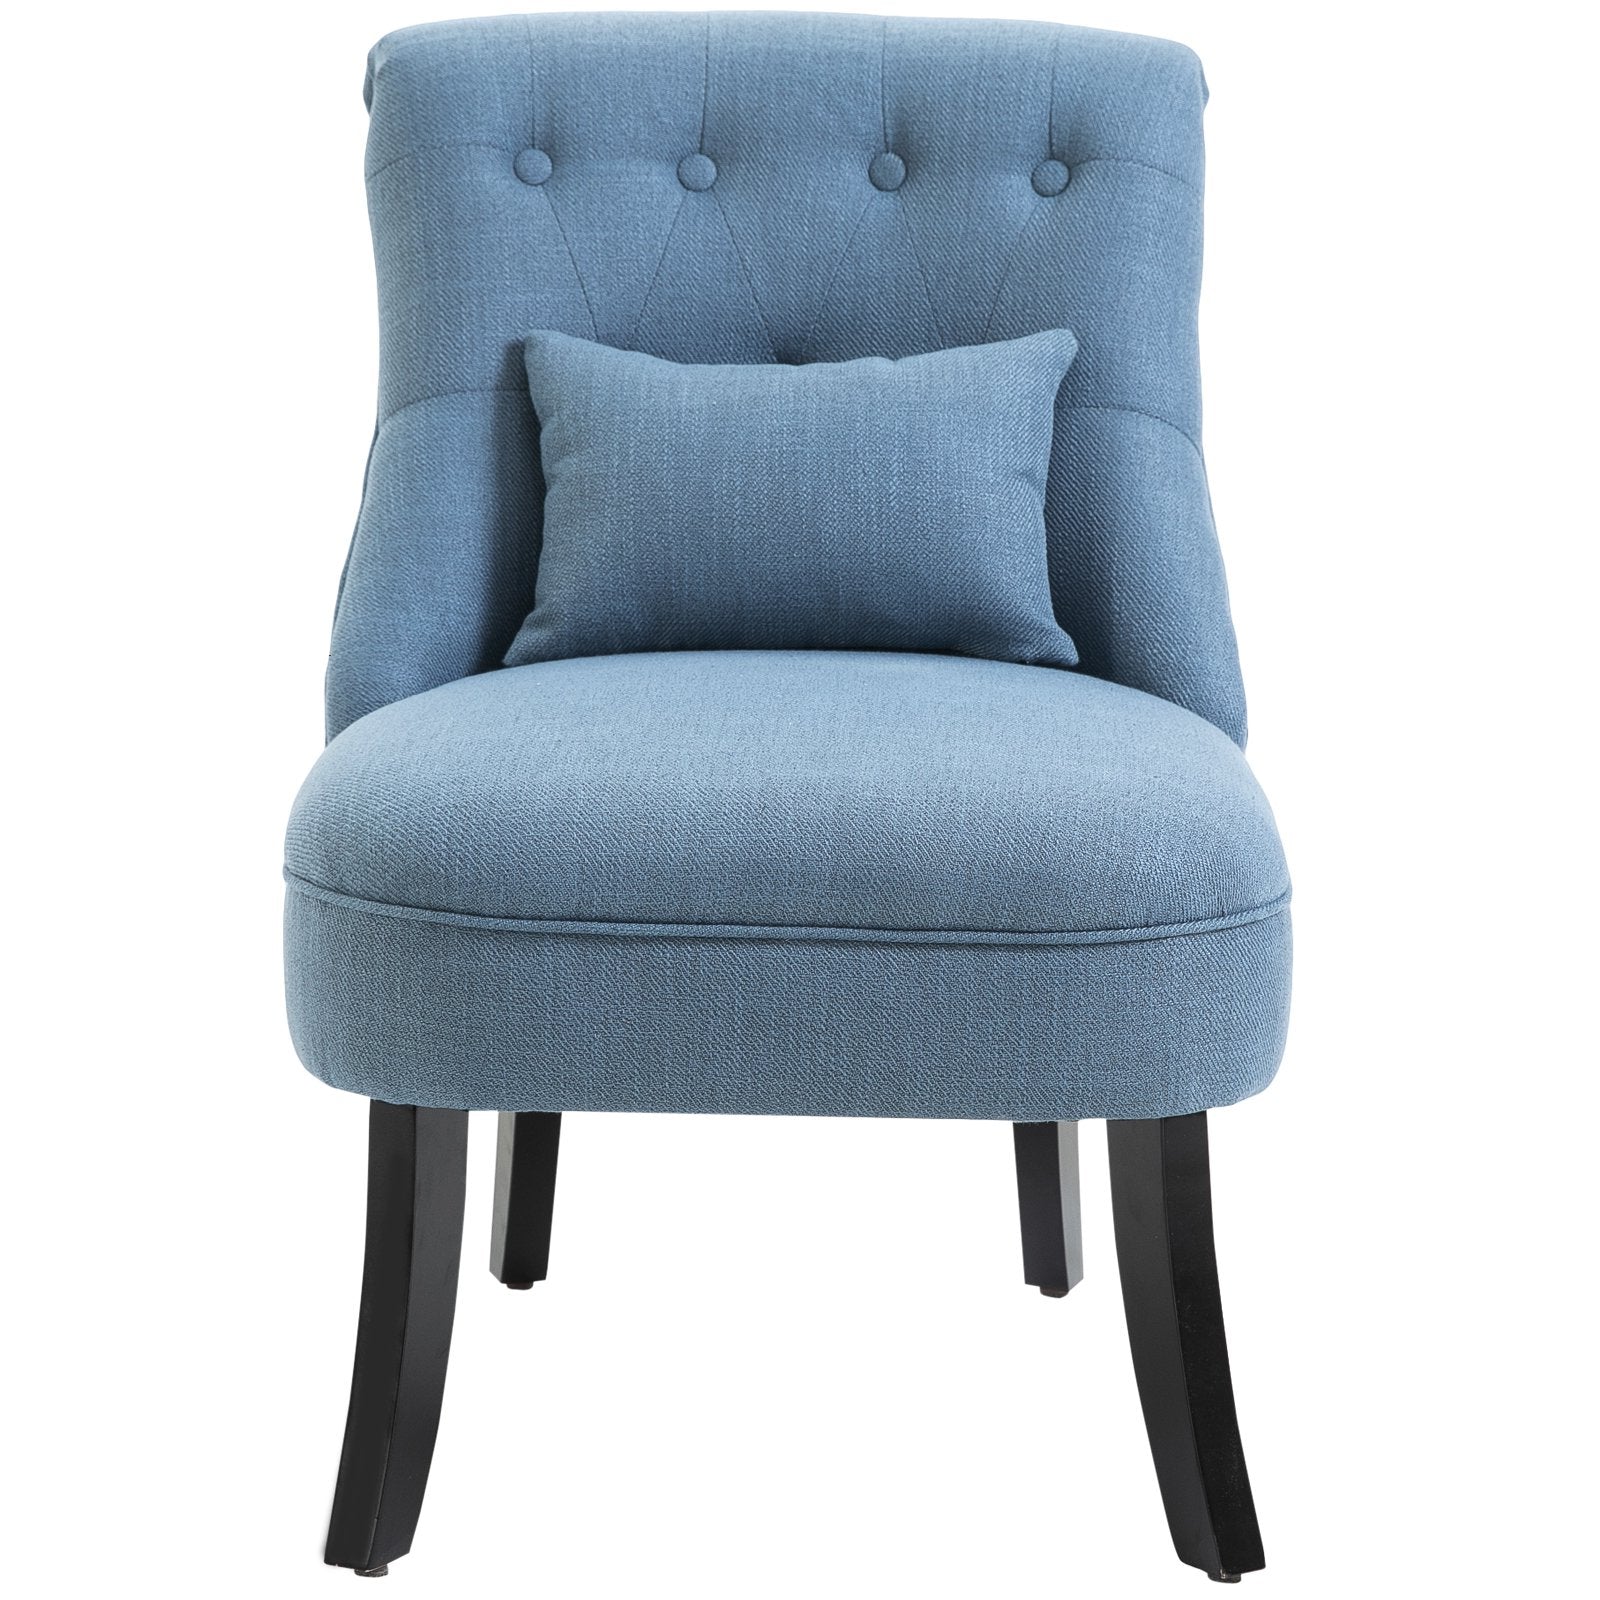 Solid Rubber Wood Tufted Single Sofa Chair W/ Pillow - Blue